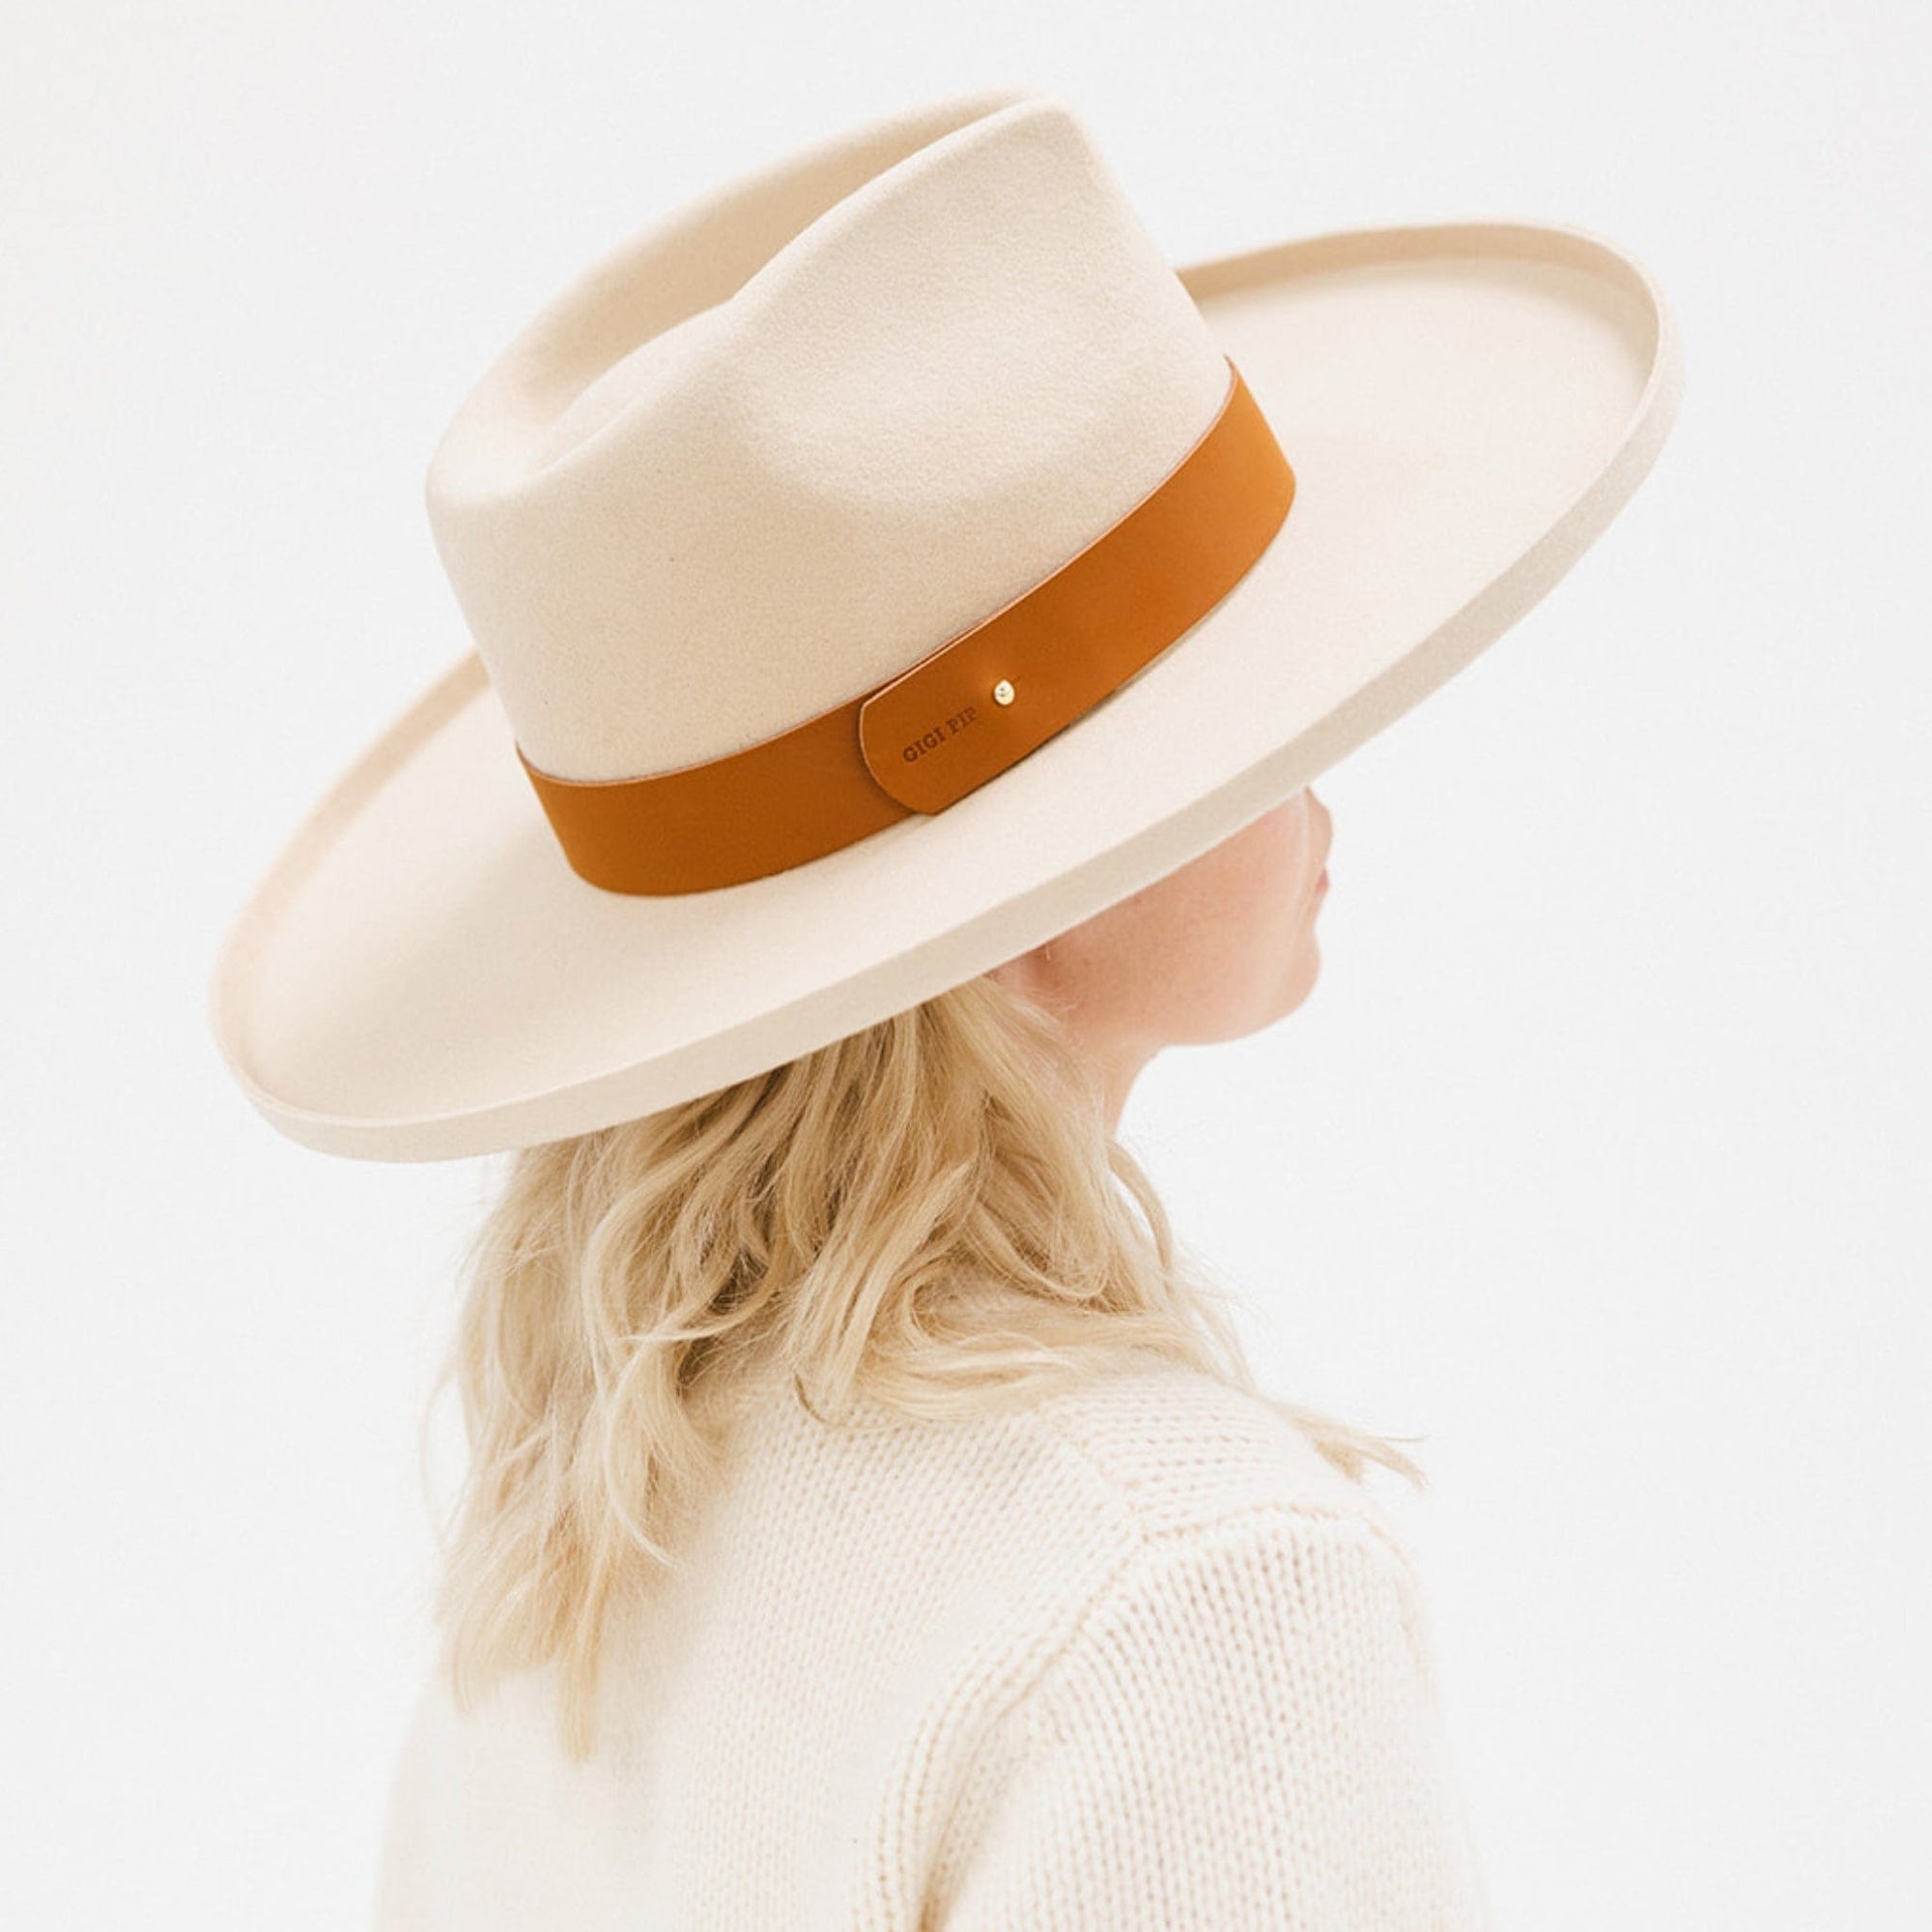 Gigi Pip hat bands + trims for women's hats - Wide Leather Band - 100% genuine leather hat band featuring a metal pin enclosure + Gigi Pip embossed on the edge [cognac]